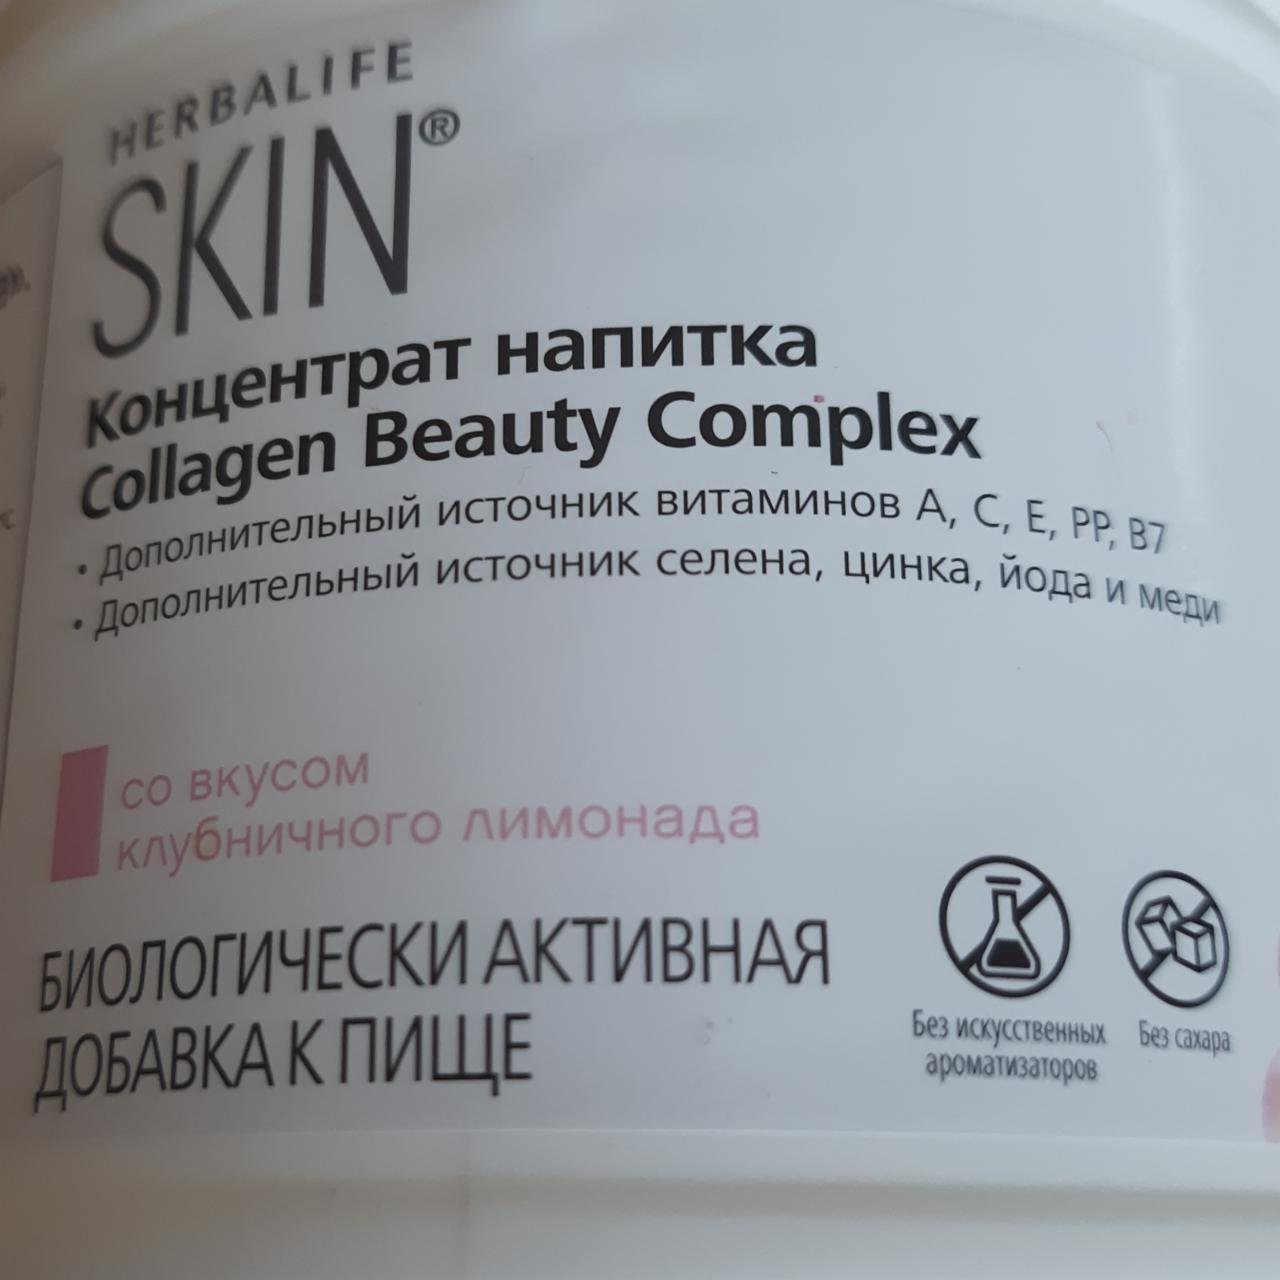 Фото - Концентрат напитка Collagen Beauty Complex SKIN Herbalife